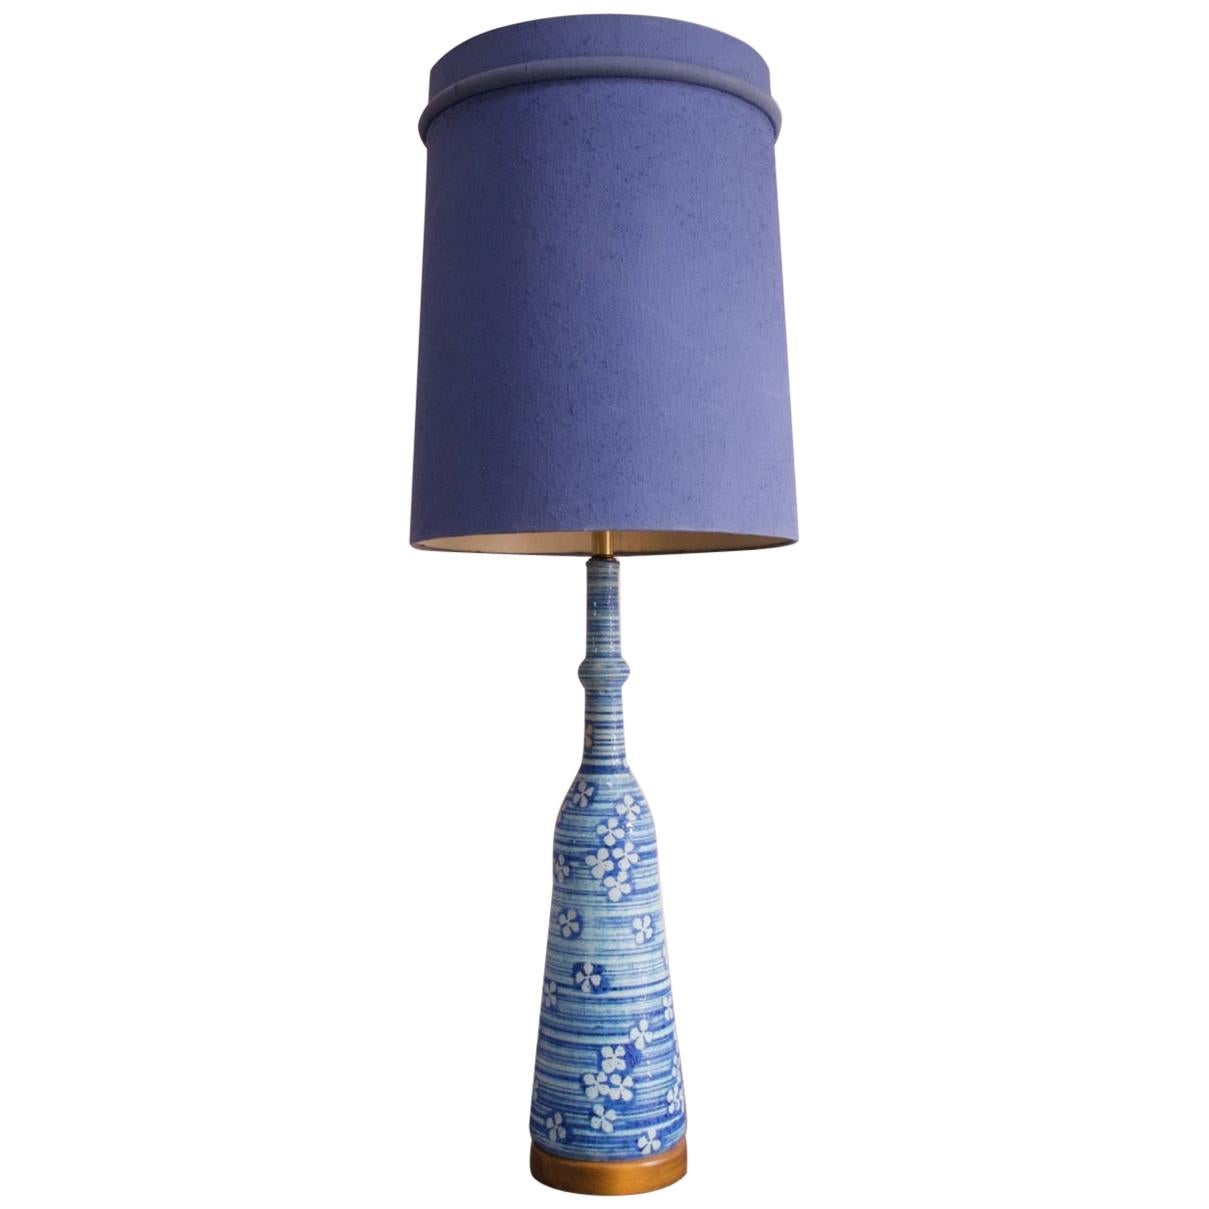 Oversized Midcentury Blue Ceramic Lamp with Floral Motif